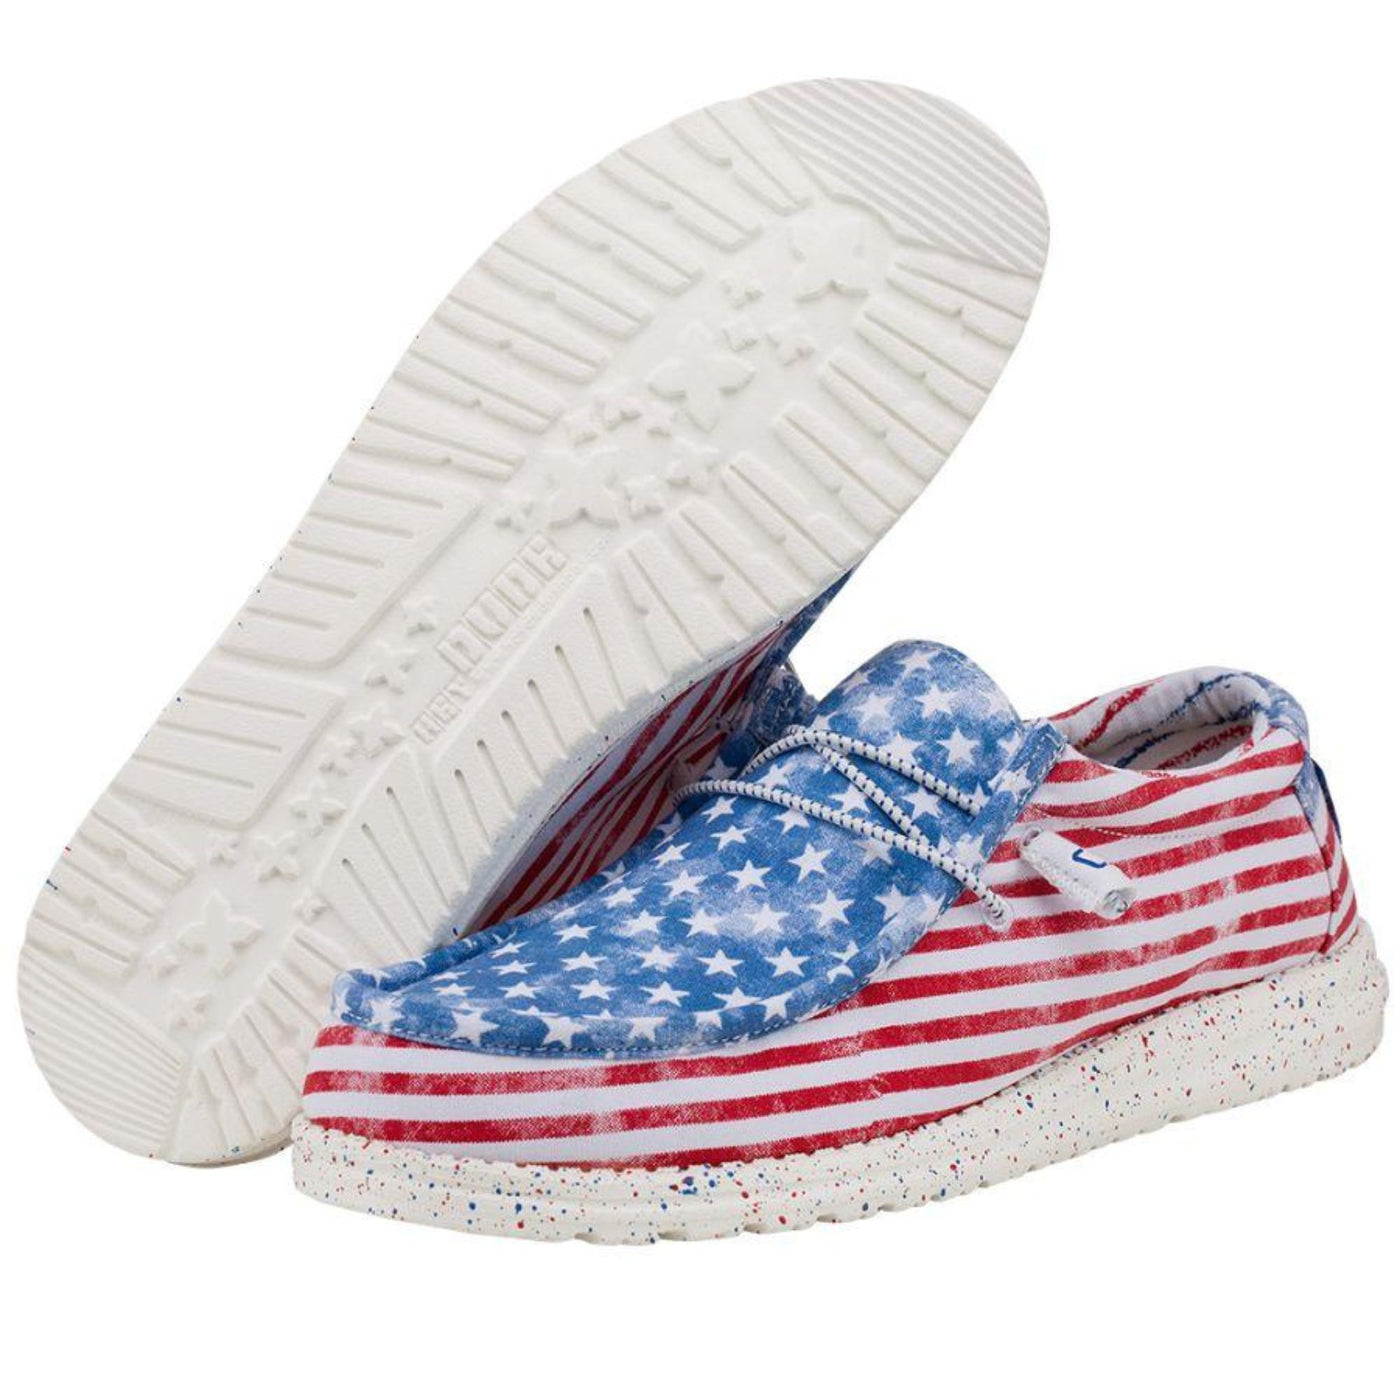 Men's Wally Stars and Stripes